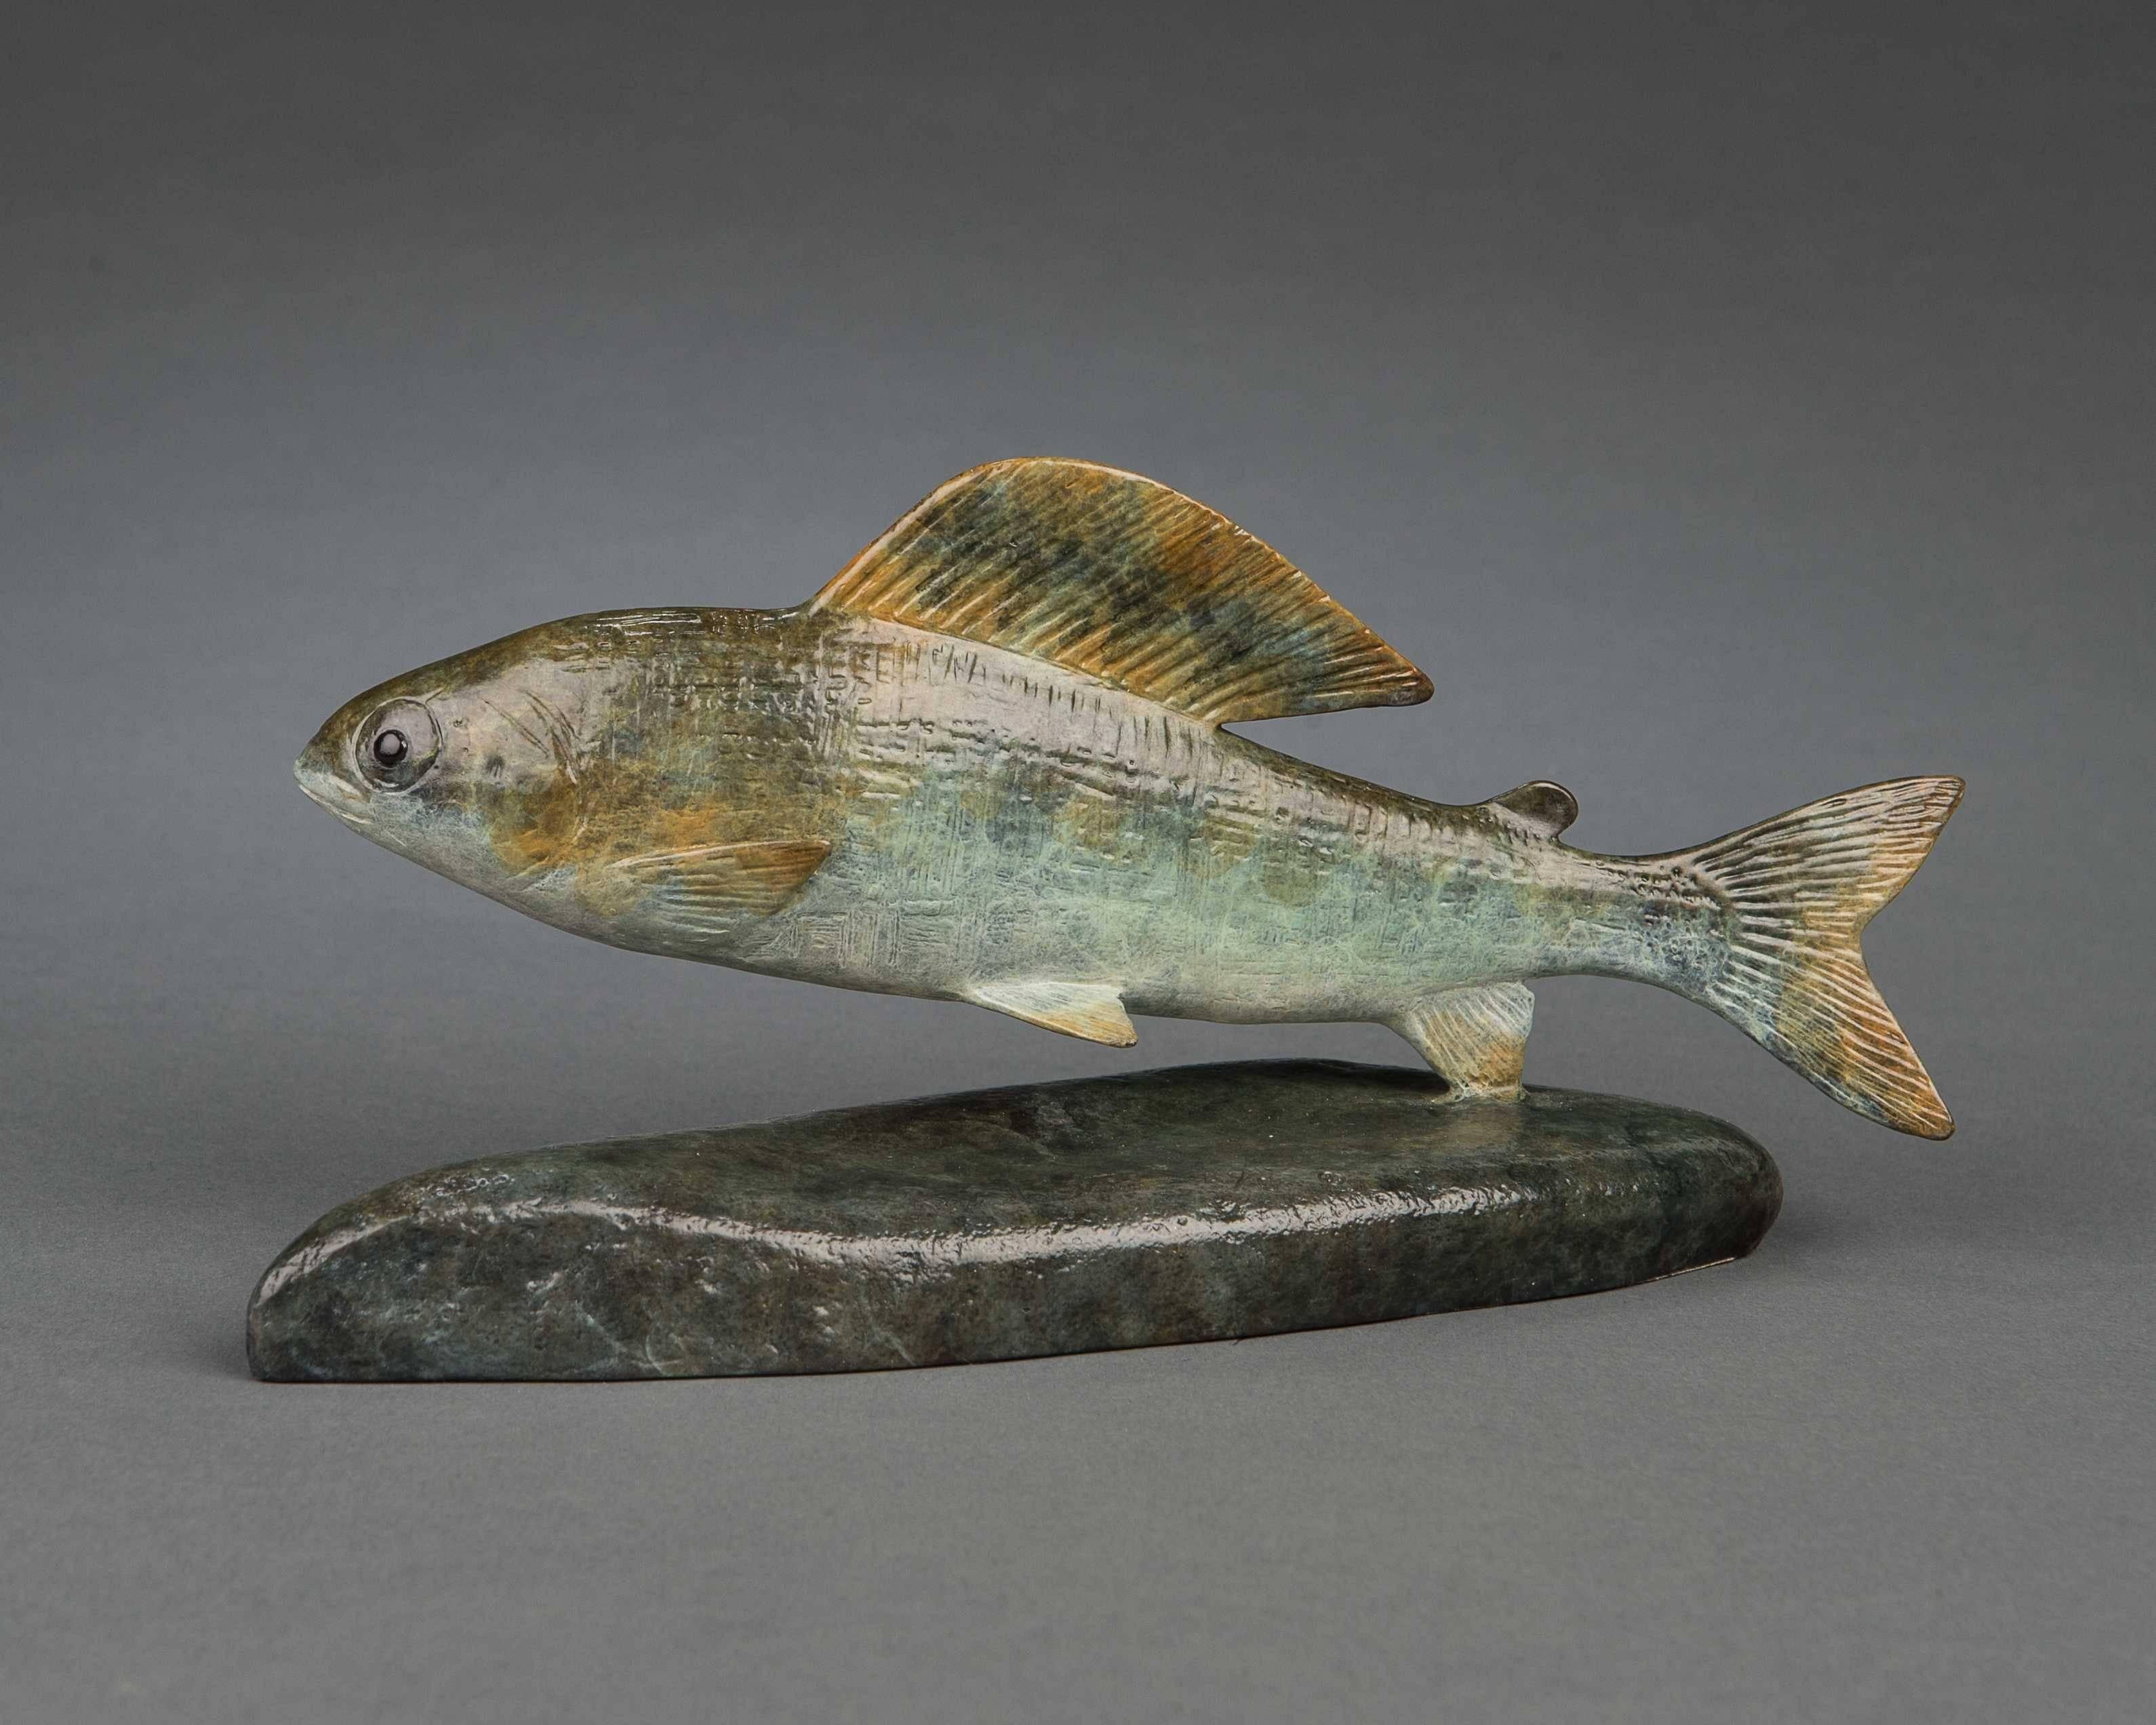 A beautiful wildlife sculpture of a 'Grayling' the perfect gift for a wildlife lover or fishing and hunting enthusiast.

Richard Smith has gained an international reputation for his works of art, he has exhibited at prestigious galleries such as the